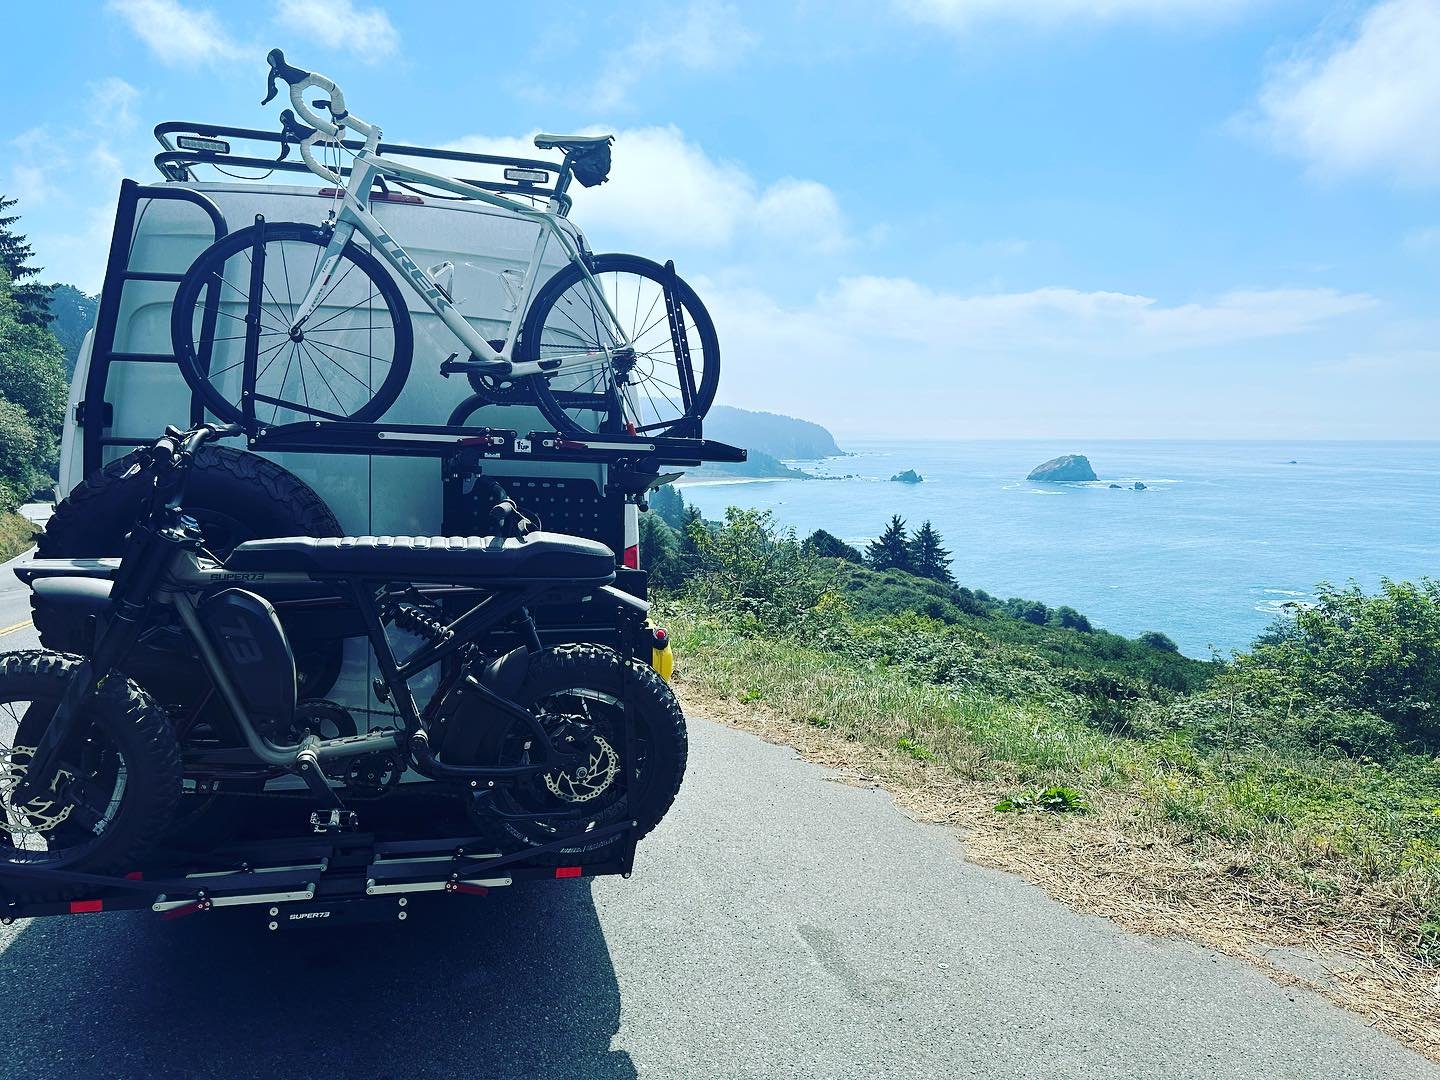 Such a wonderful drive down the California coast!! Engine 13 proudly offering @super73 bikes - which really rounds out your vanlife adventures!! In this shot we are carrying a Super73 R Adventure and a ZX on a @1upusa rack (w/ Fat Tire Kit).. Can als